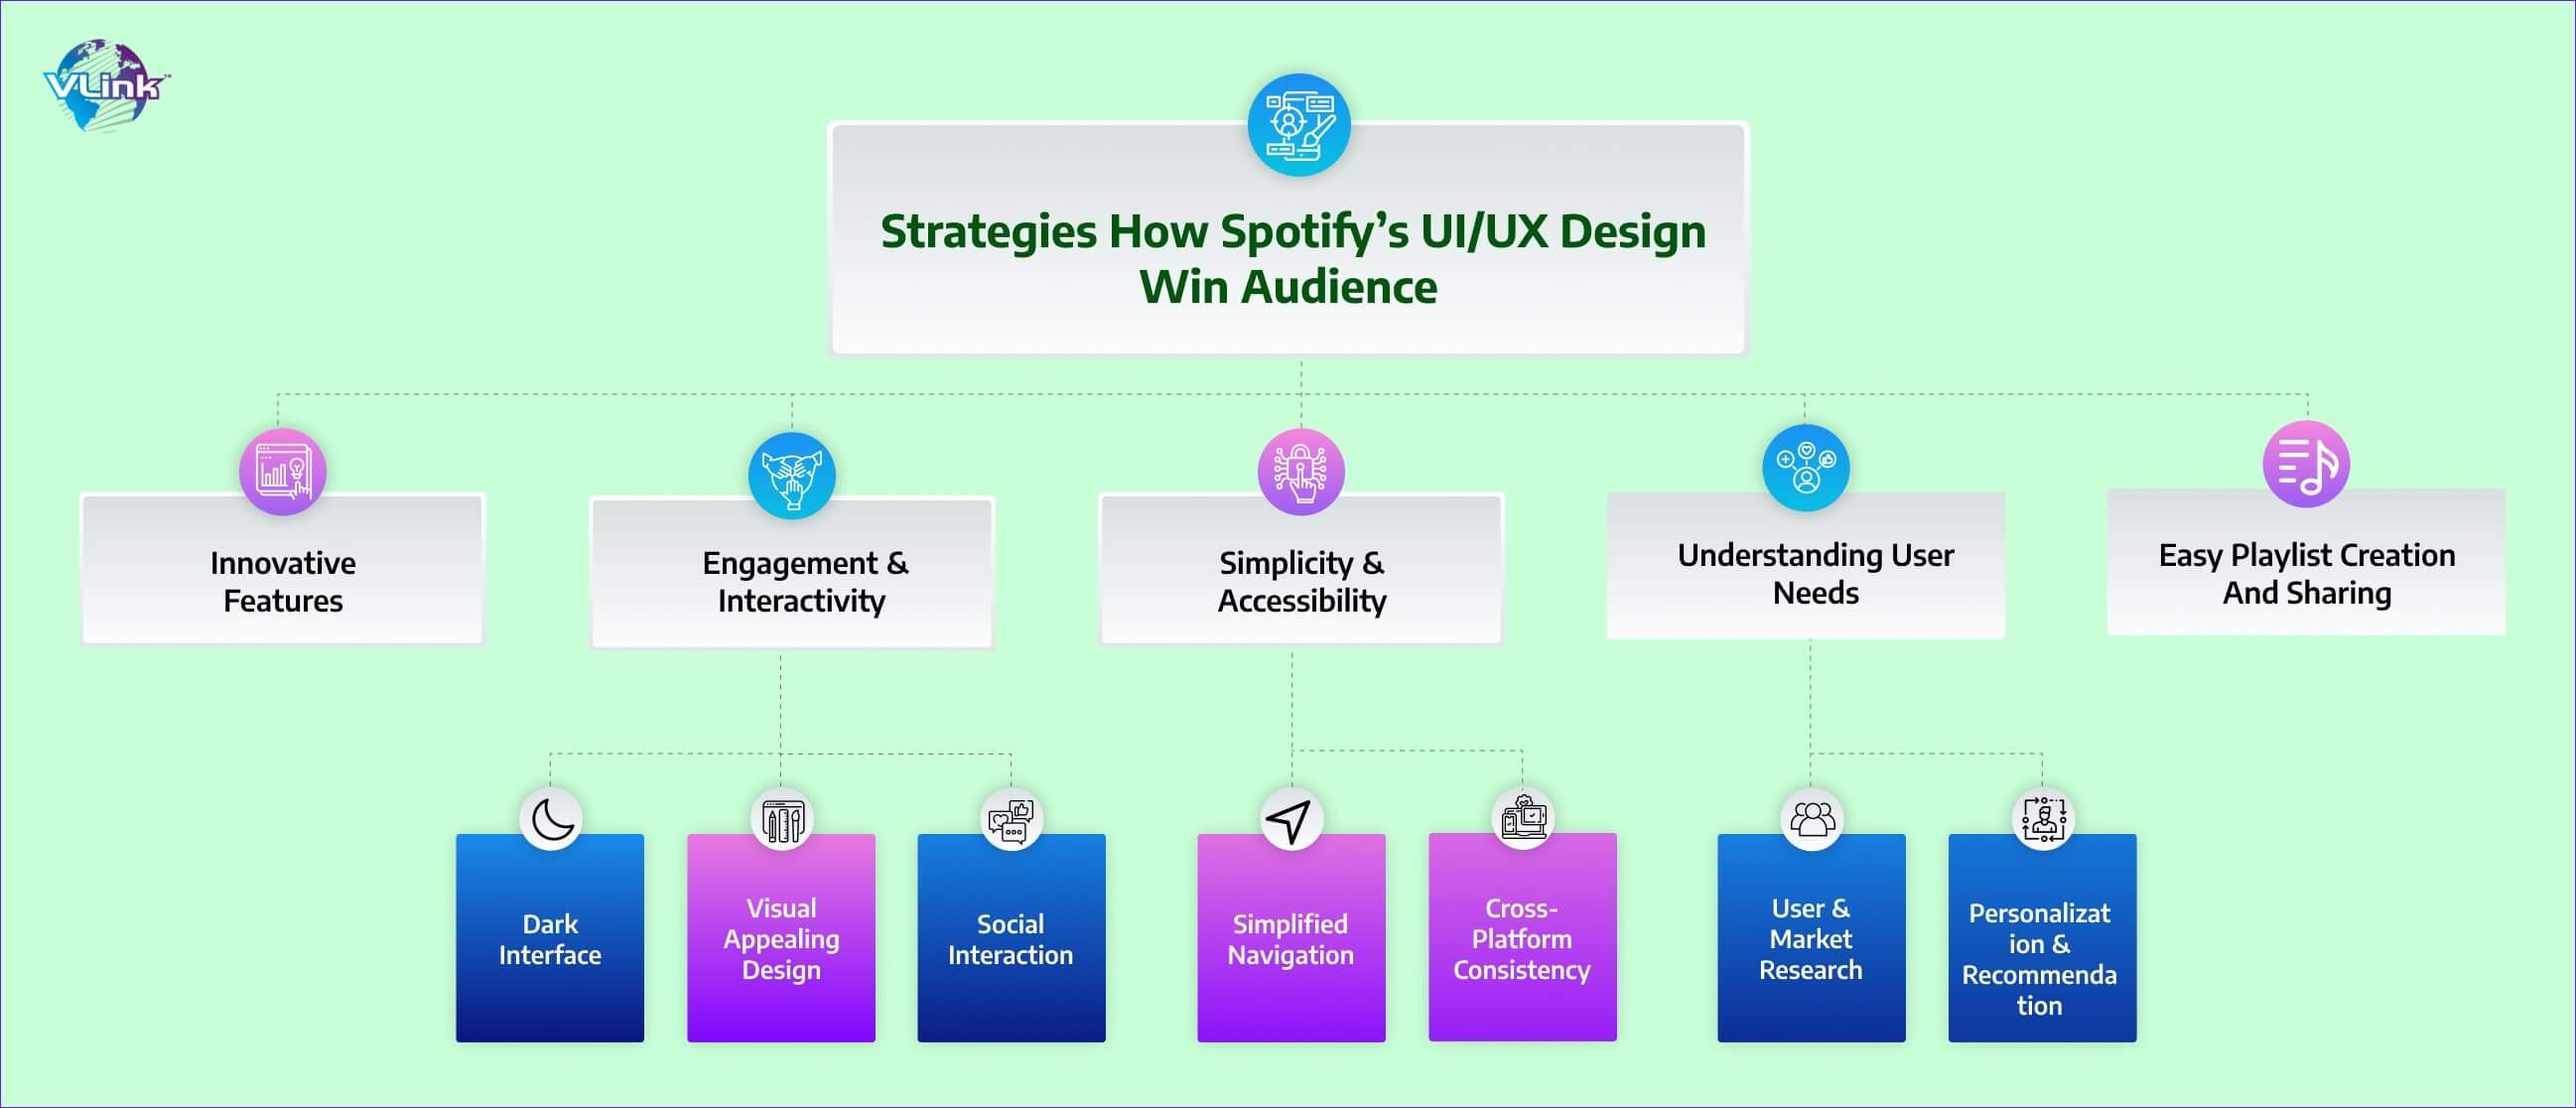 Strategies for How Spotify’s UI/UX Design Wins Audience